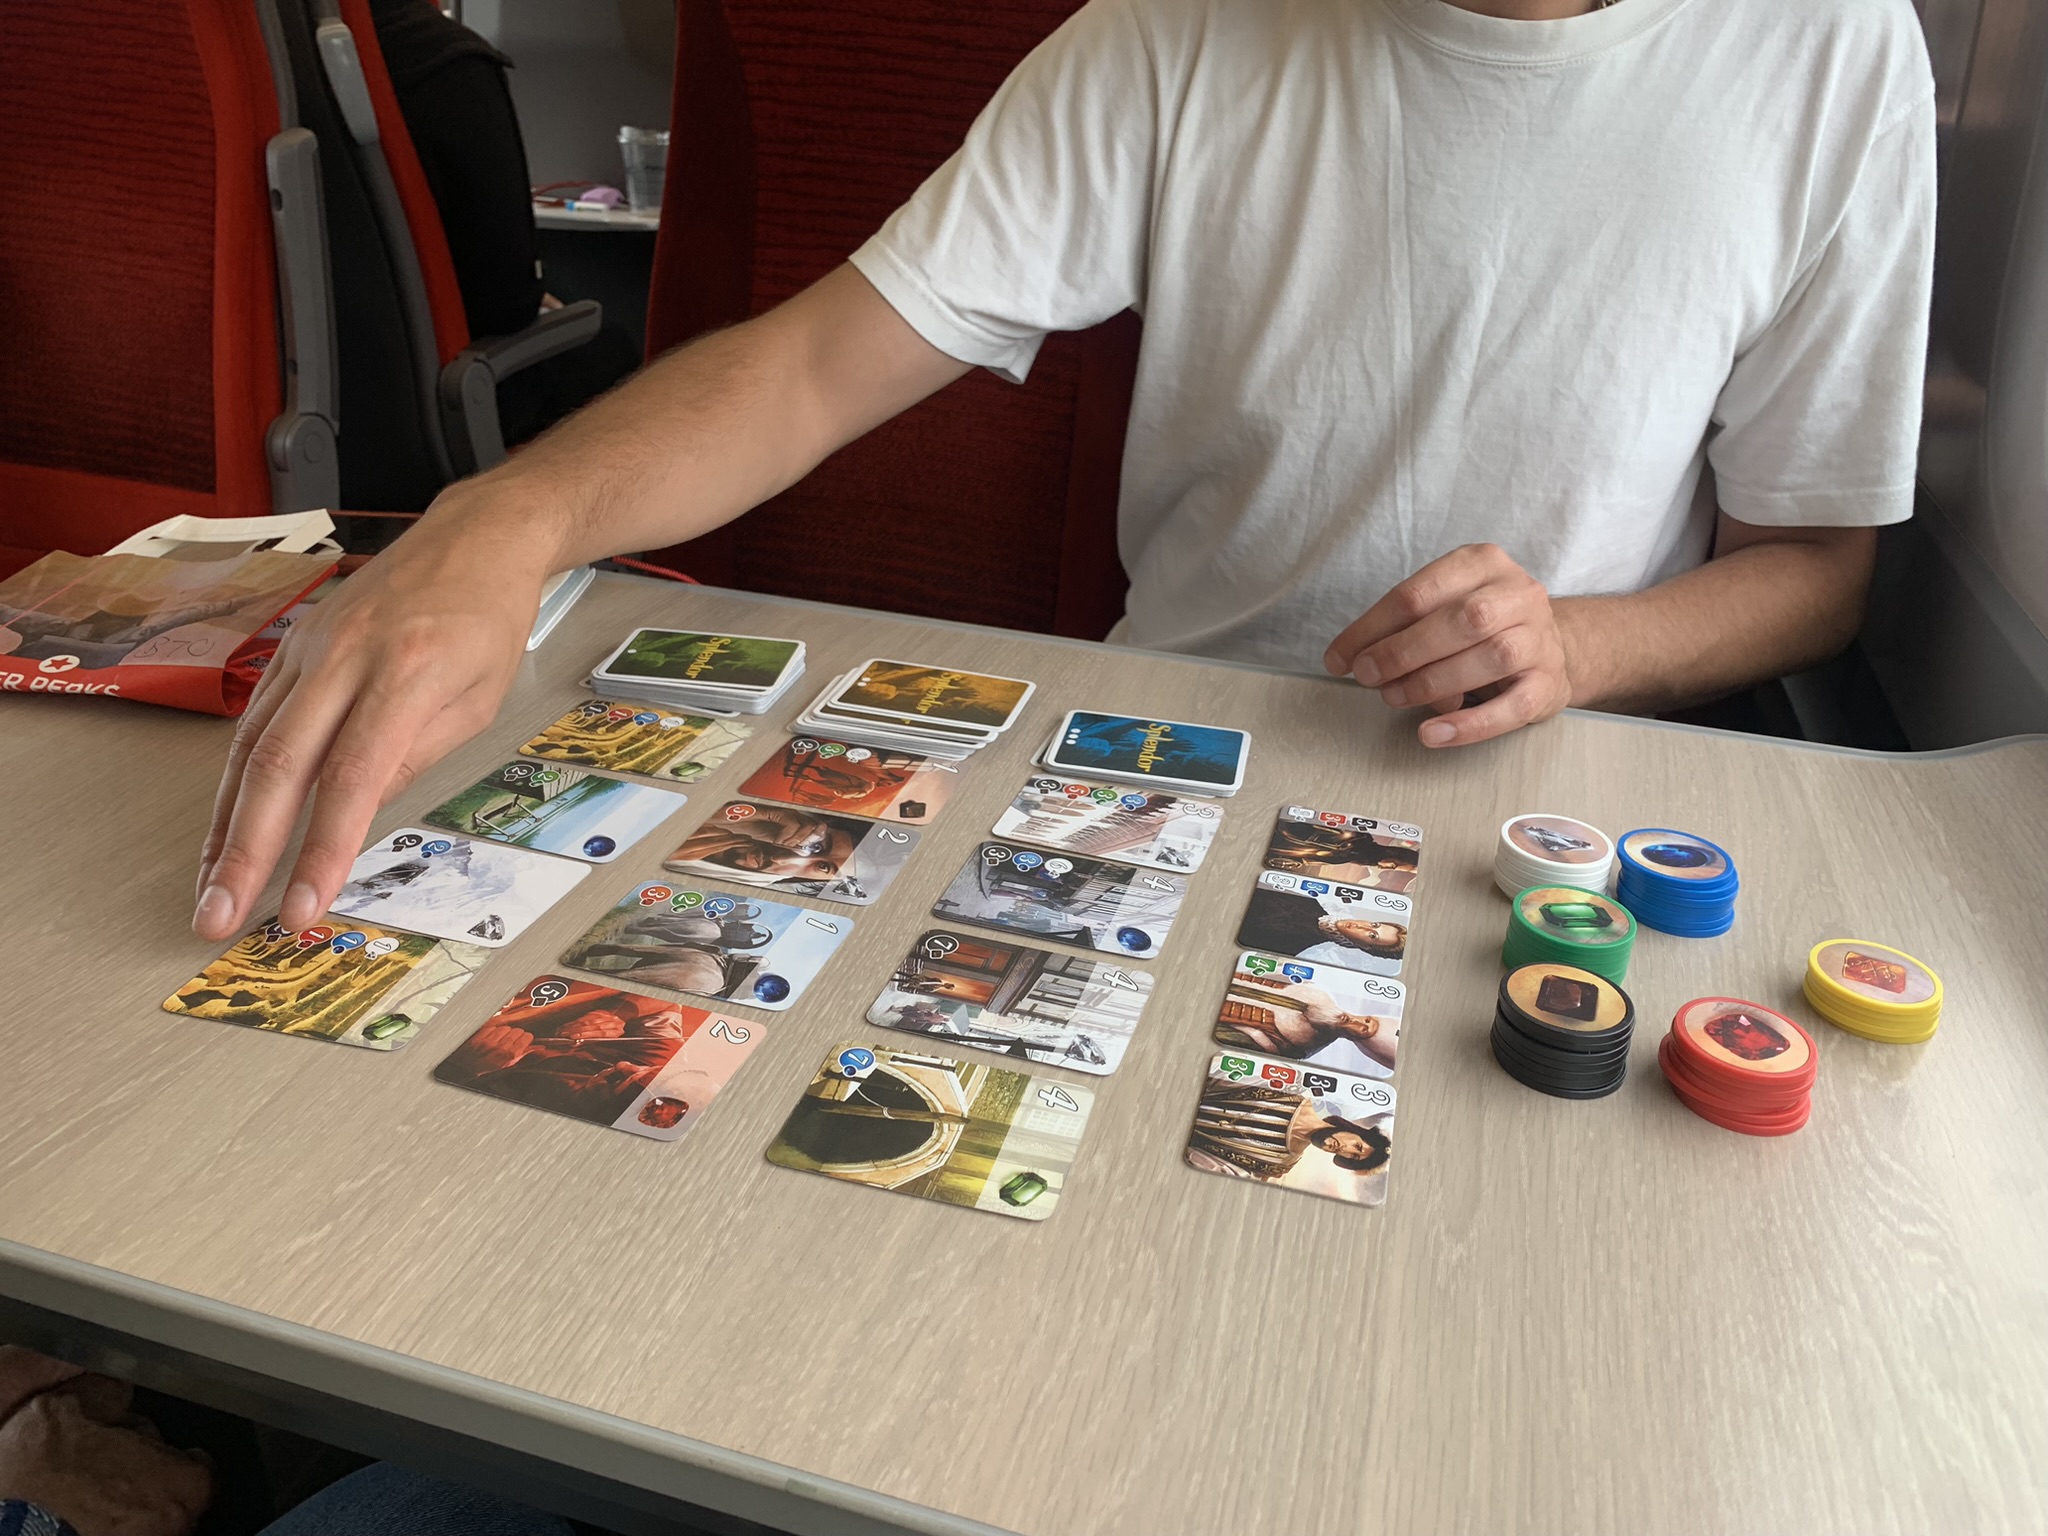 Playing a board game on a train